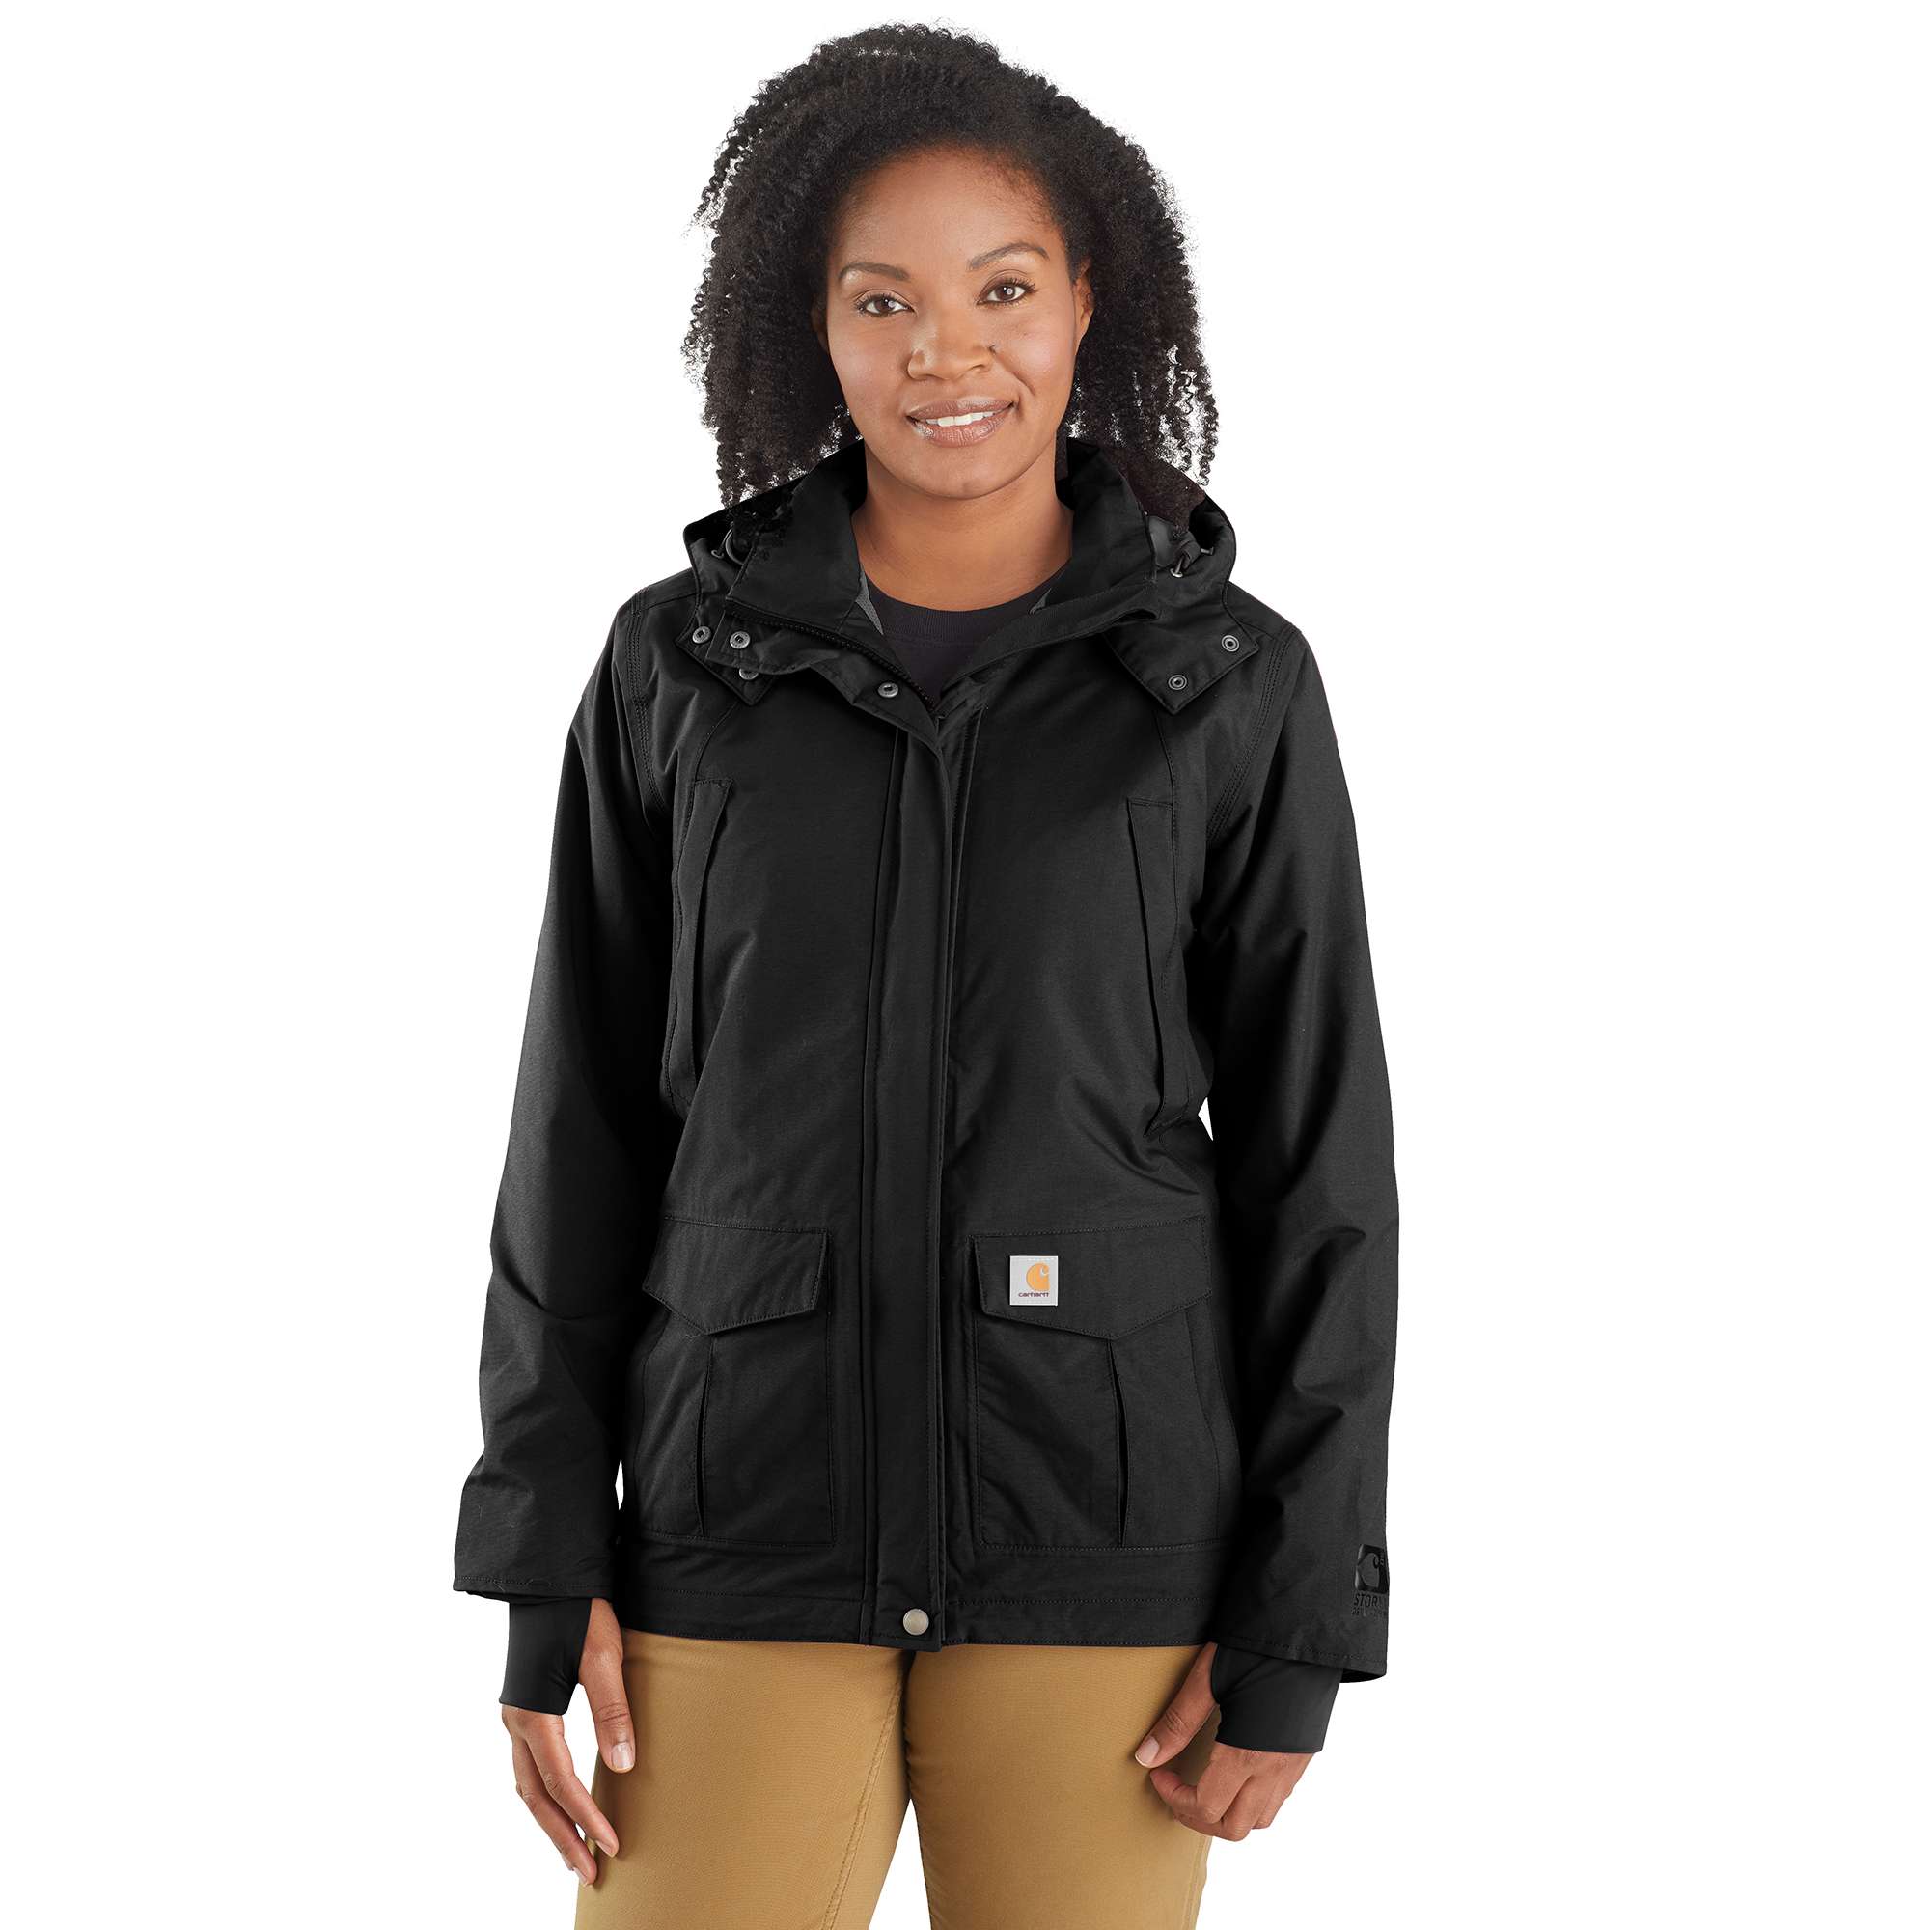 Women's Storm Defender® Jacket - Relaxed Fit Heavyweight 1 Warm Rating